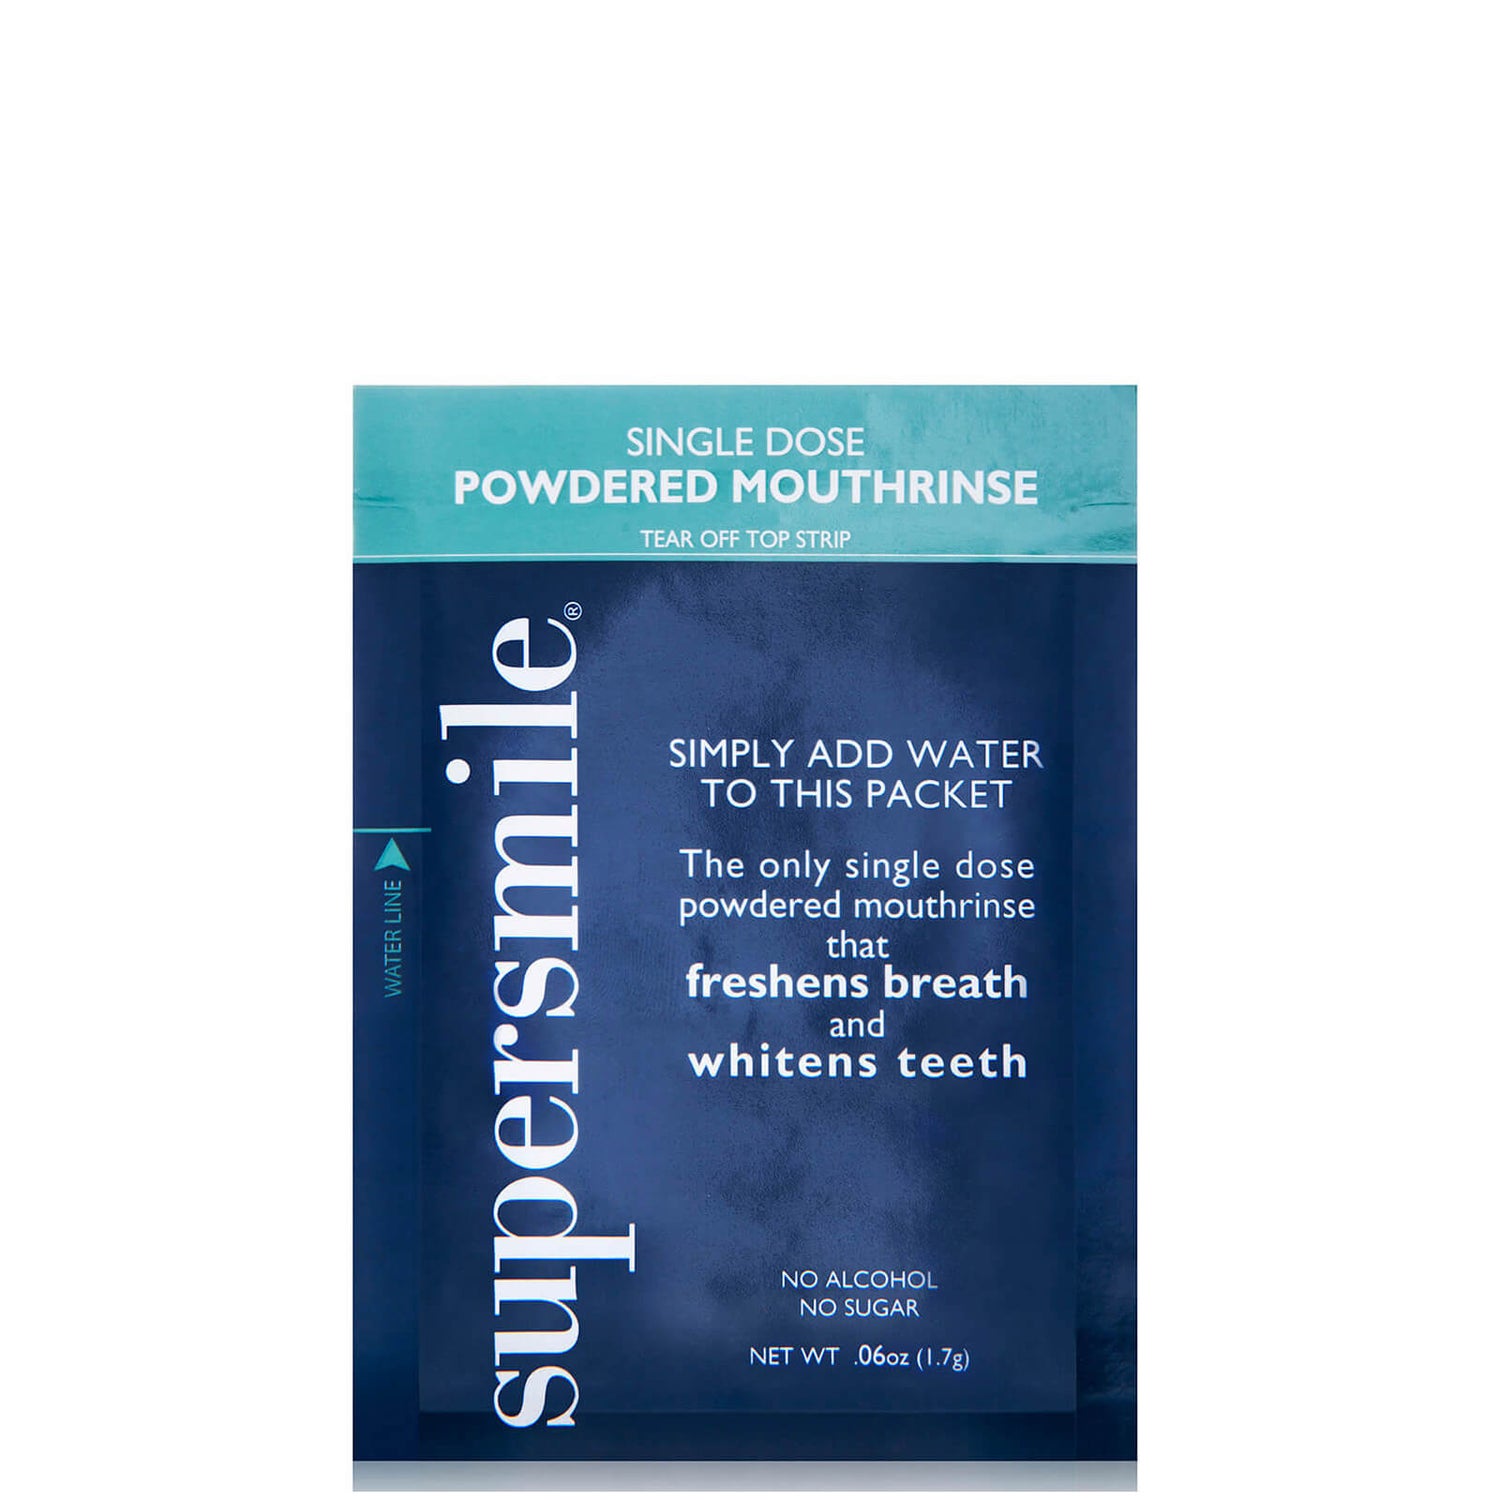 Supersmile Powdered Mouthrinse (24 count)